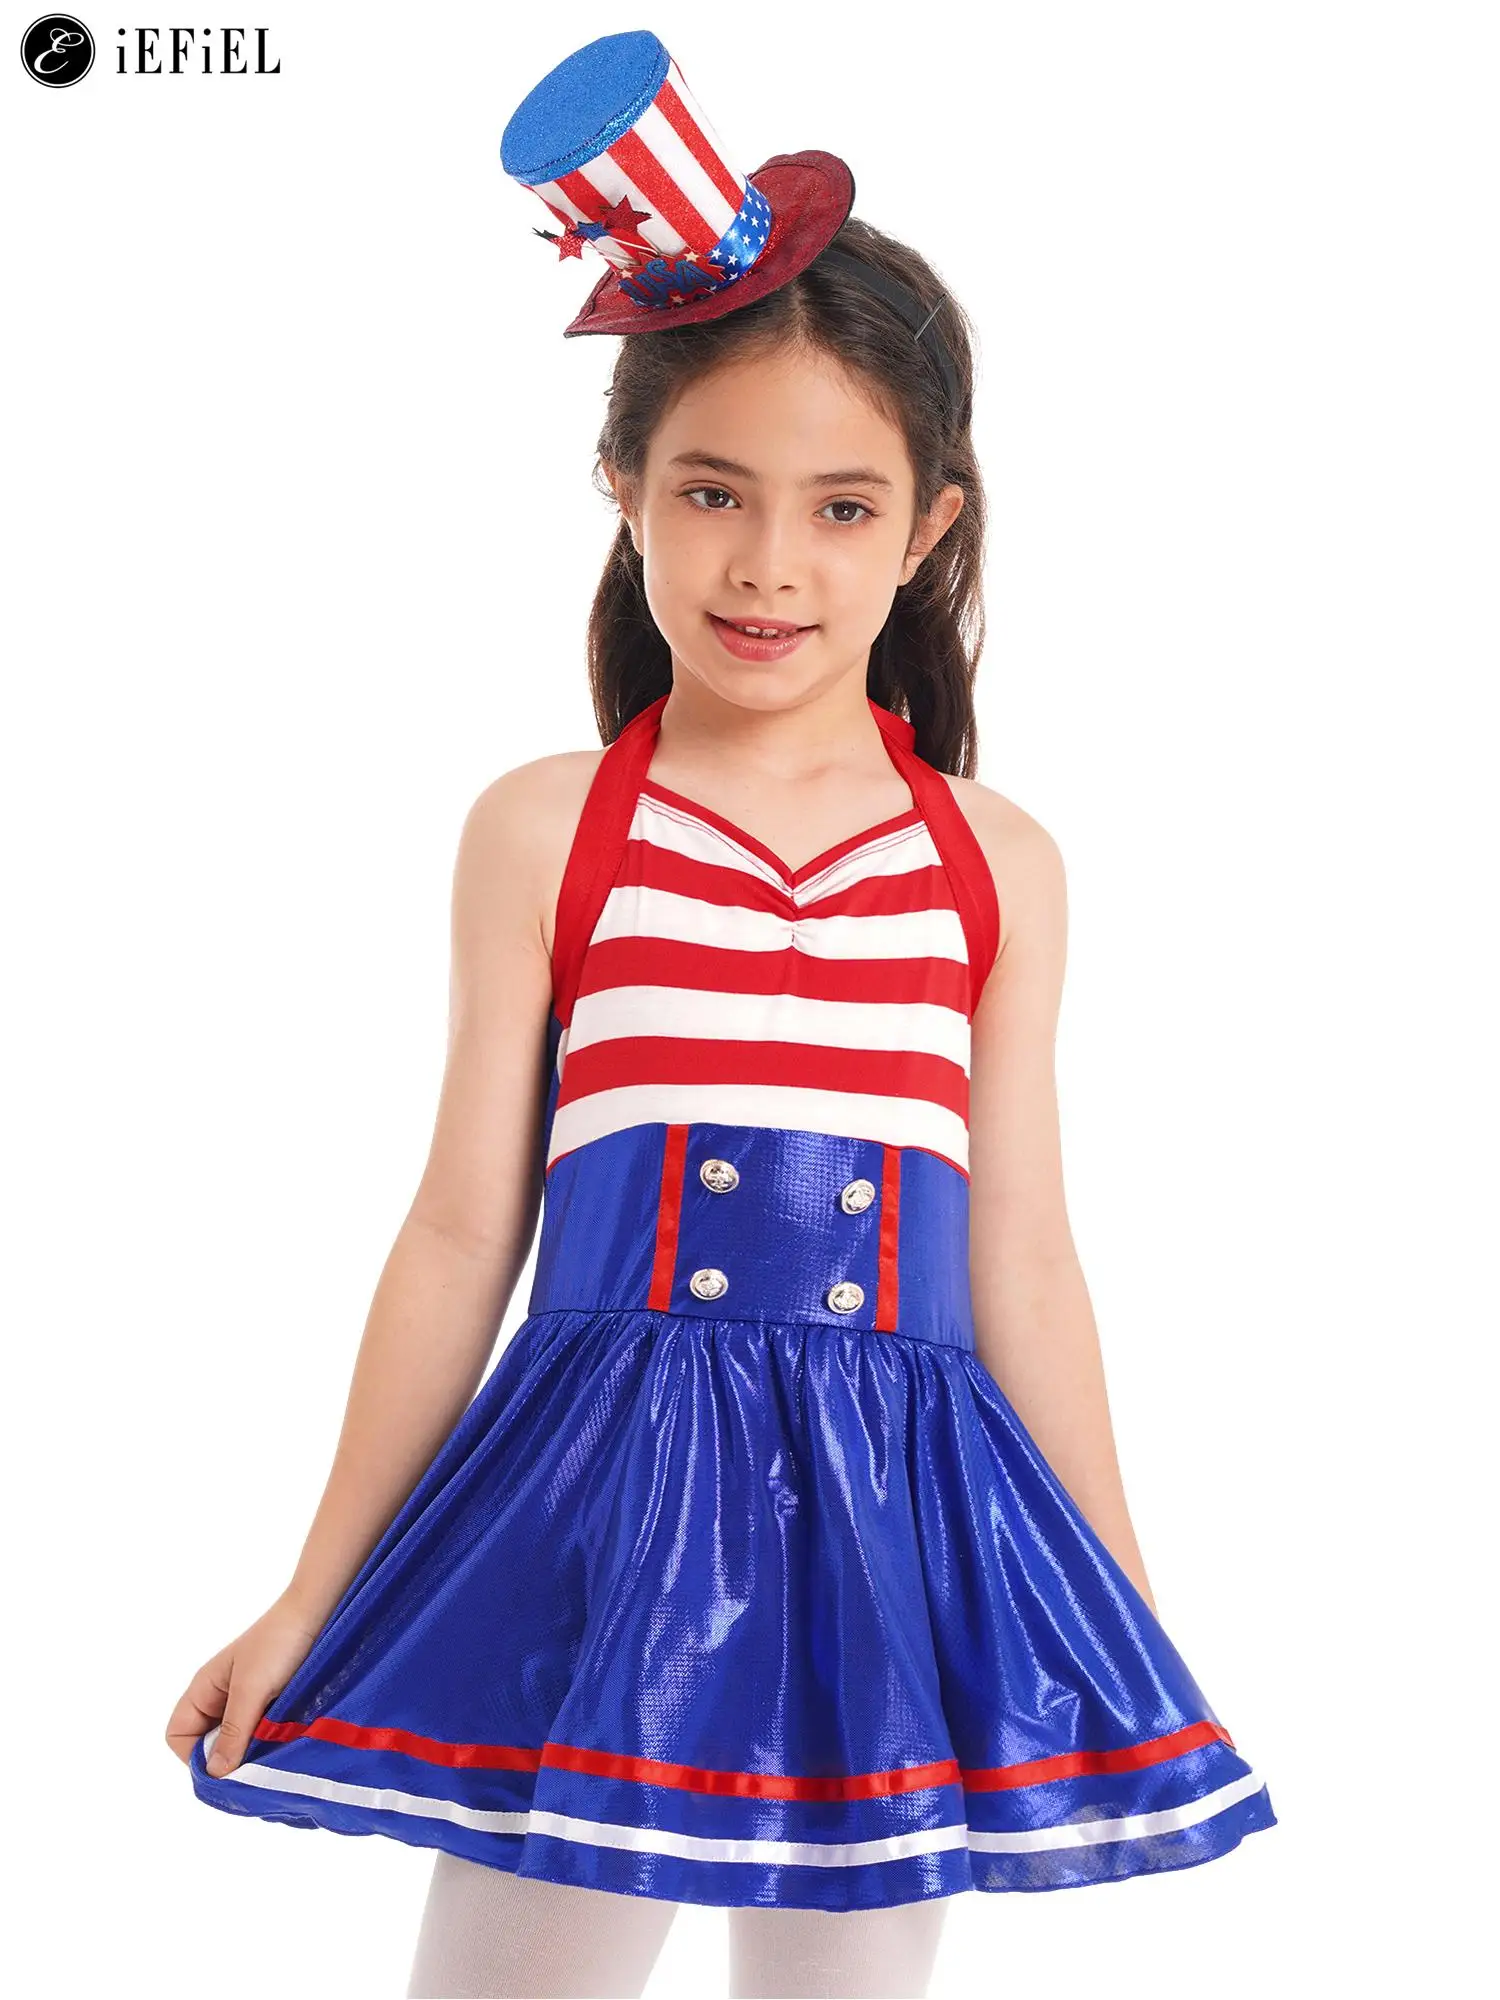 Kids Girls Patriotic Soldier Uniform 4th of July Military Army USO Dance Stage Performance Costume Halloween Fancy Dress Up